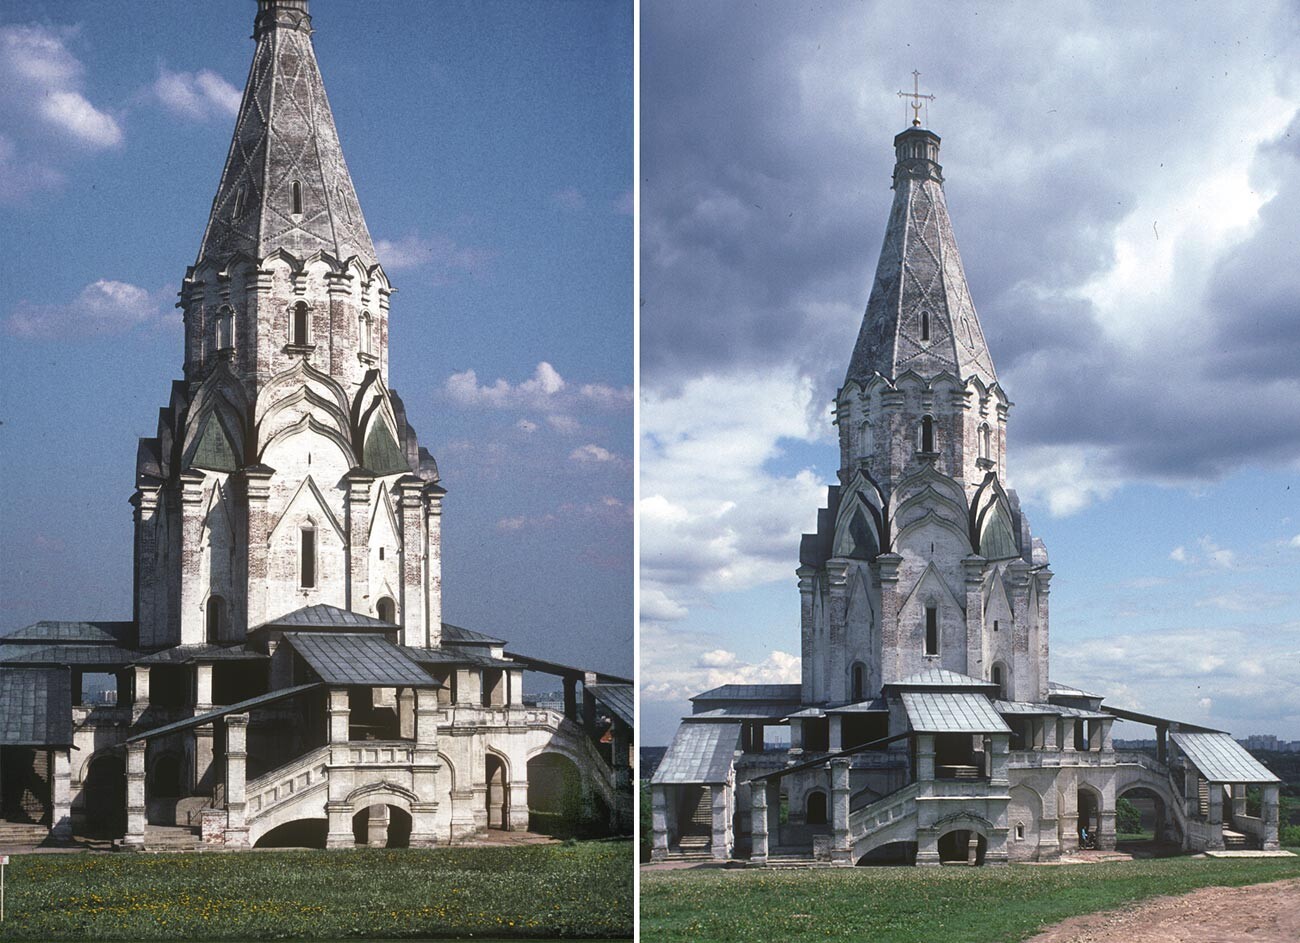 Left: Church of the Ascension. West view. Whitewash applied in 1979 has noticeably faded. June 1, 1992.
Right: West view with faded whitewash. June 11, 1993